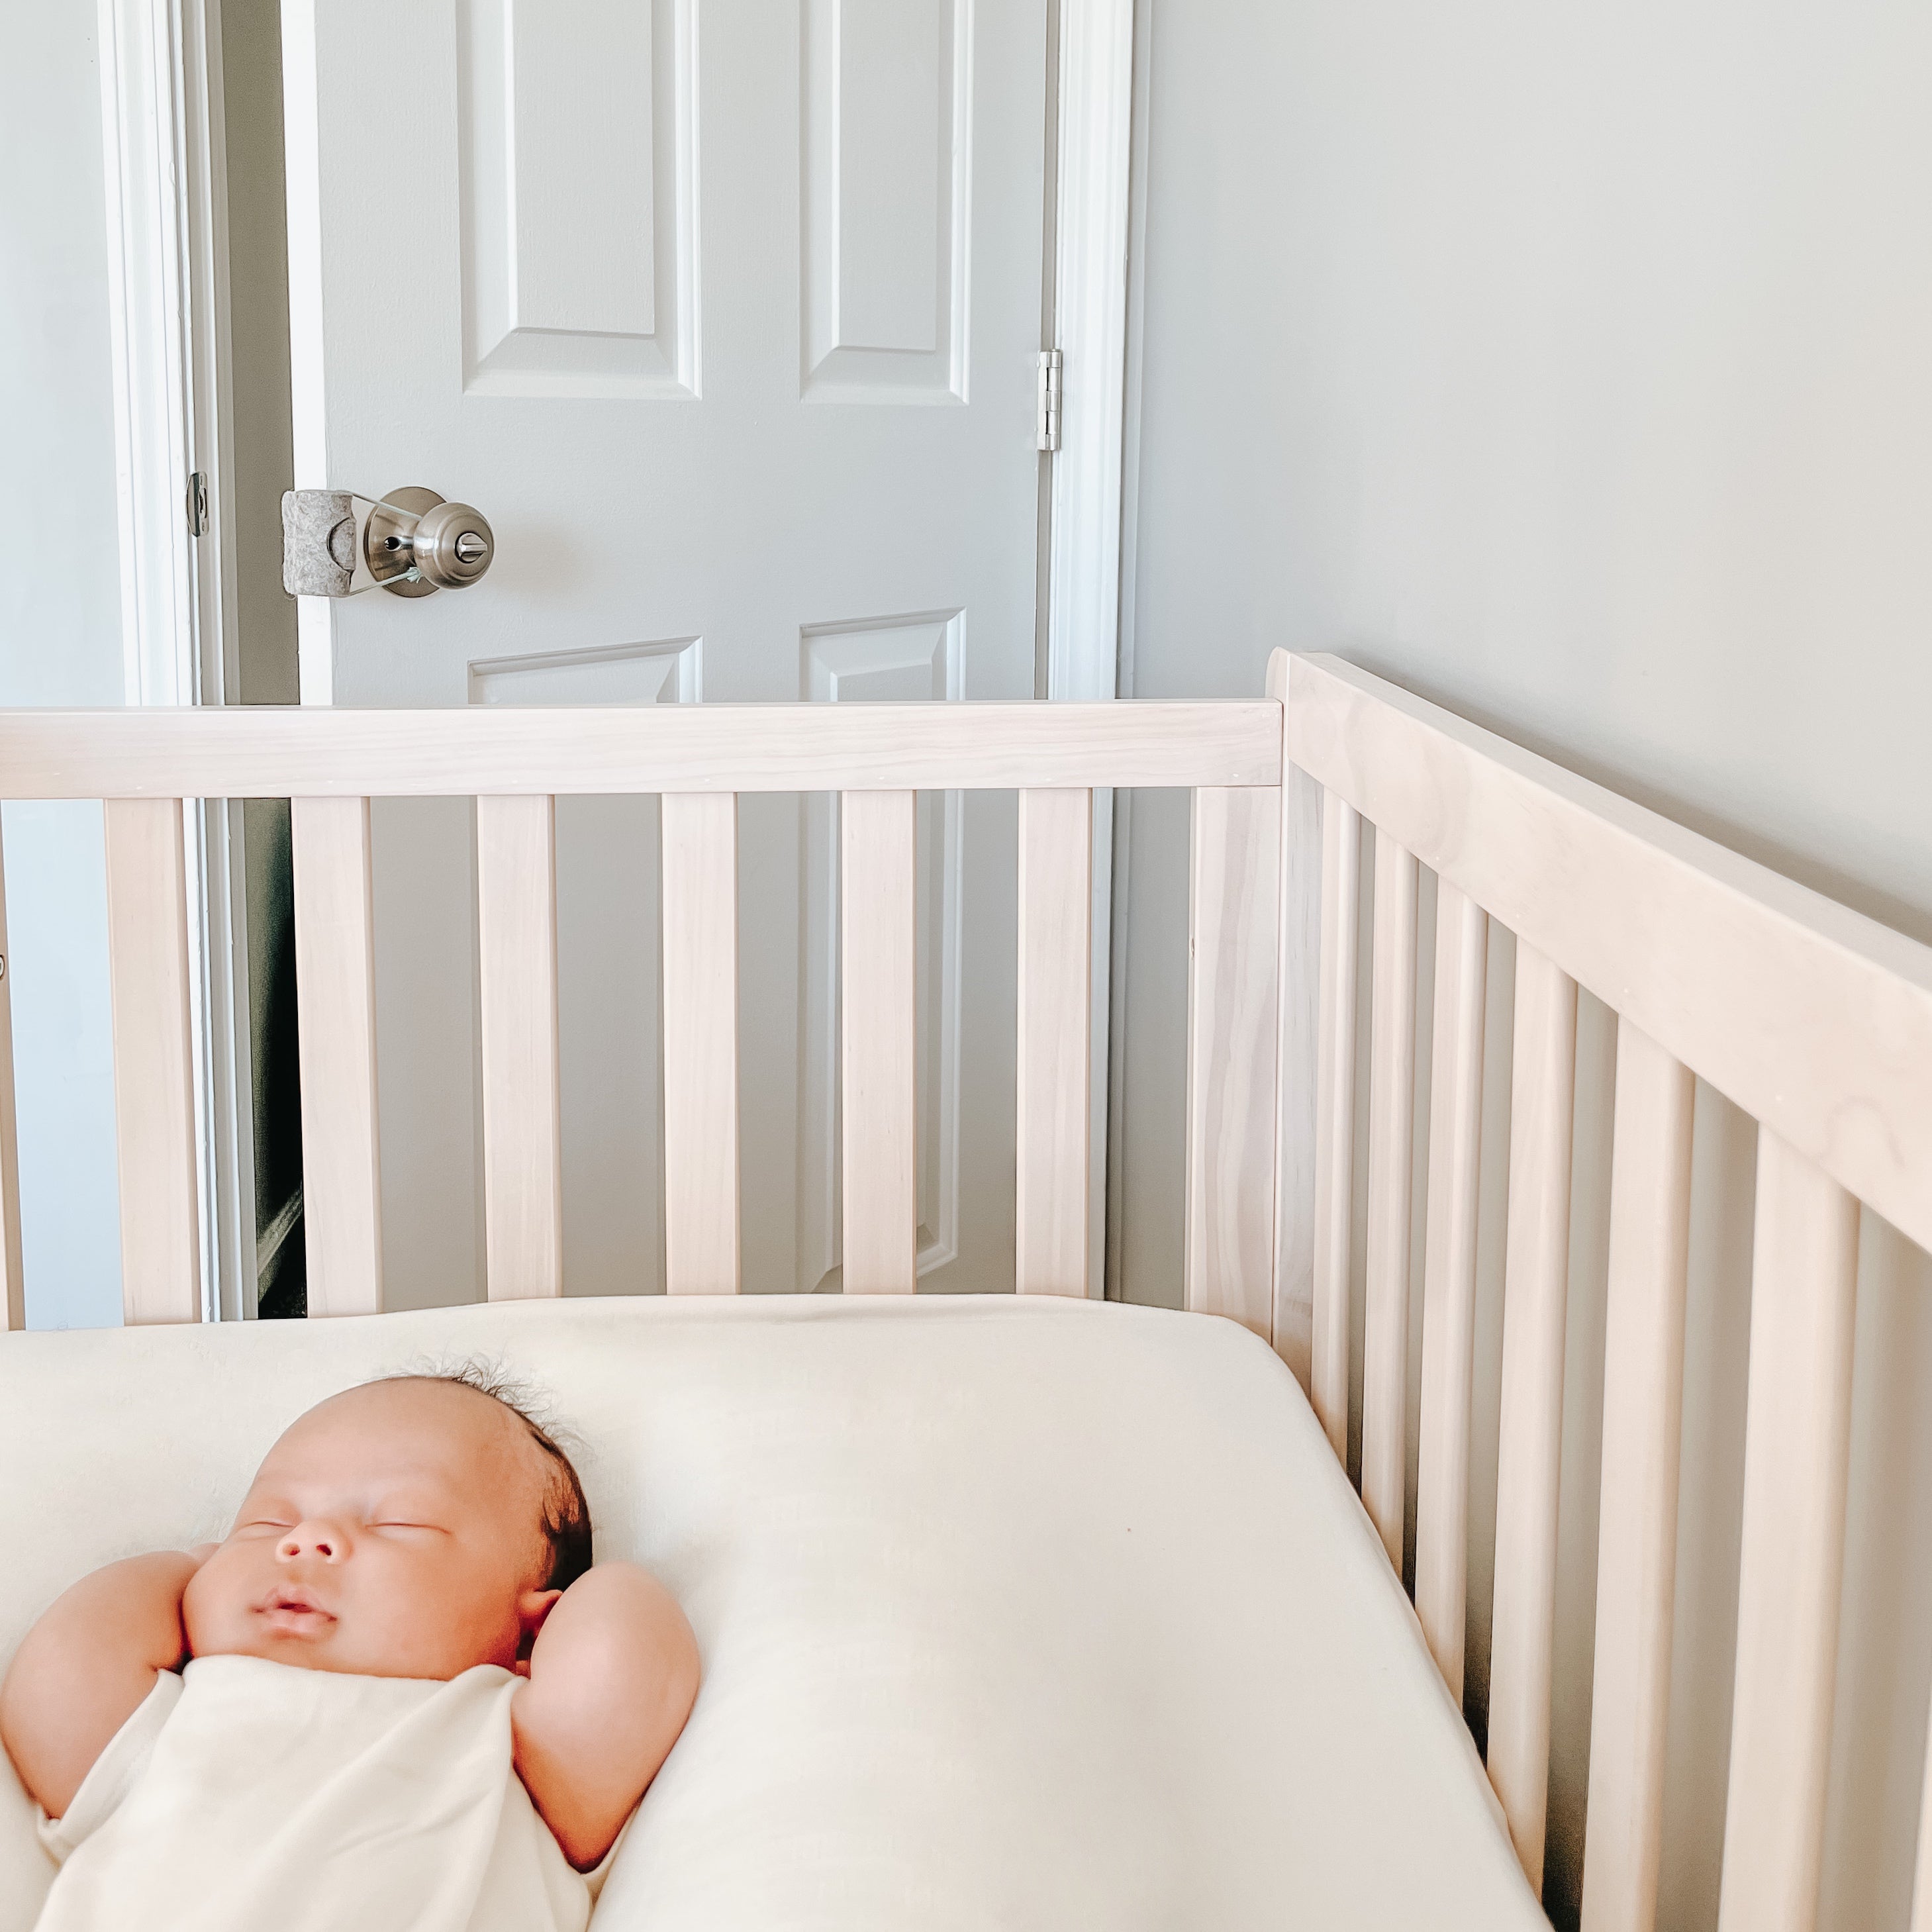 A baby sleeping in a crib, with the door ajar in the background. On the door is installed an Oolie Shoosh door silencer and safety bumper shown, with a light blue cord snugly looped around the door handle, holding the felt bumper in place.